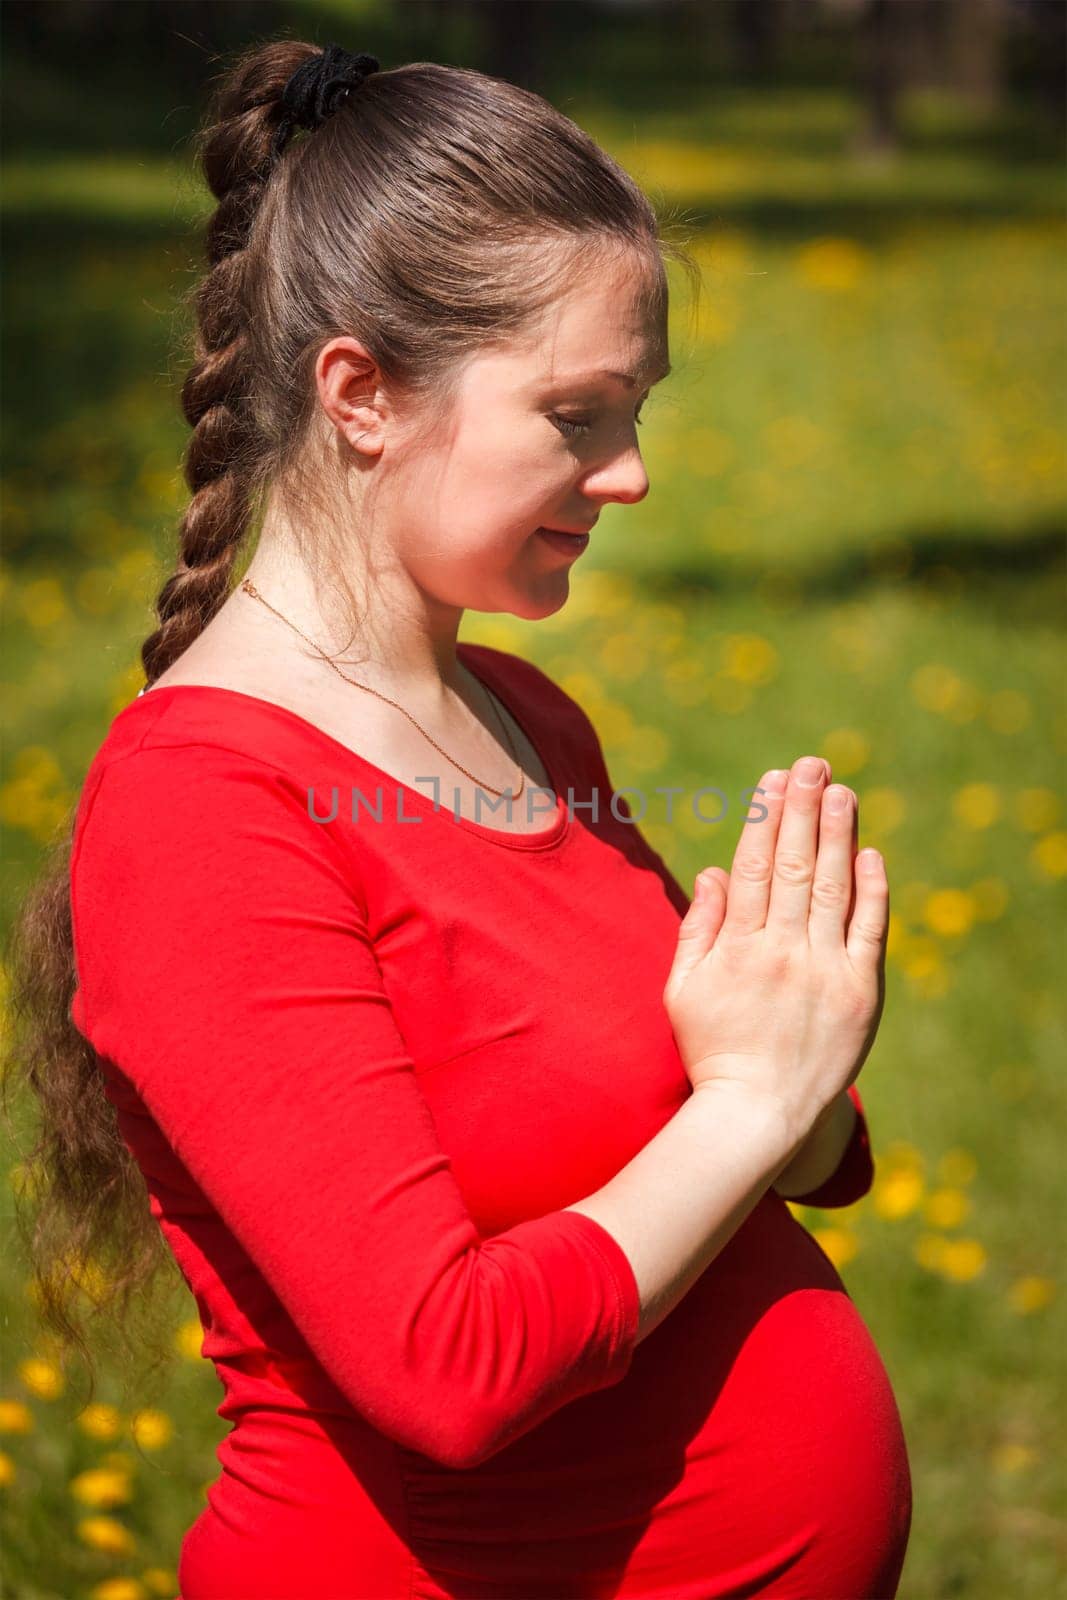 Pregnancy yoga exercise - pregnant woman doing asana Tadasana namaste -Mountain pose with salutation outdoors on grass lawn with dandelions in summer